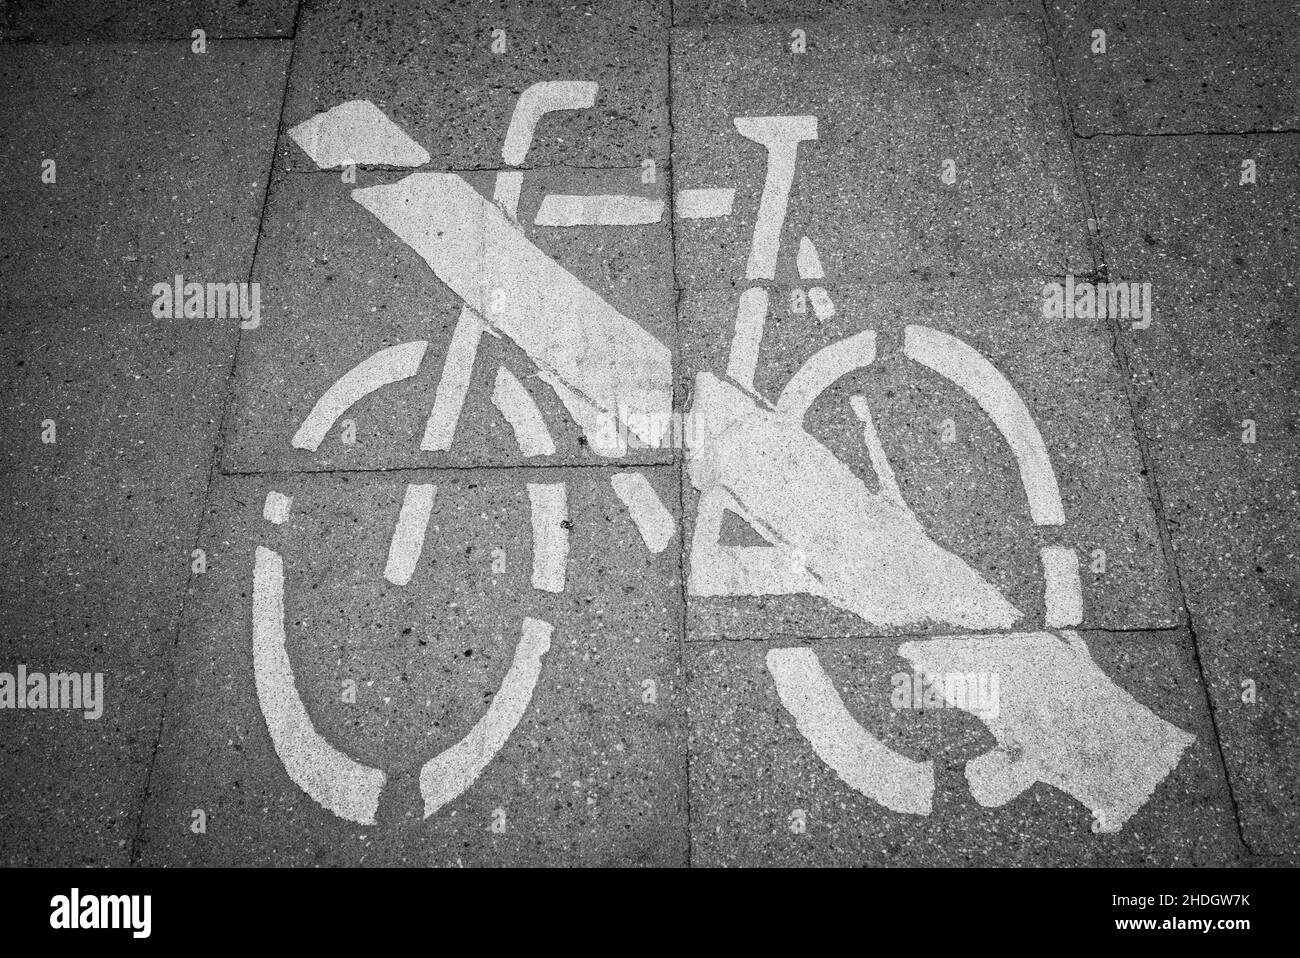 cycling, pictogram, do not enter sign, pictograms, do not enter signs, prohibition sign Stock Photo